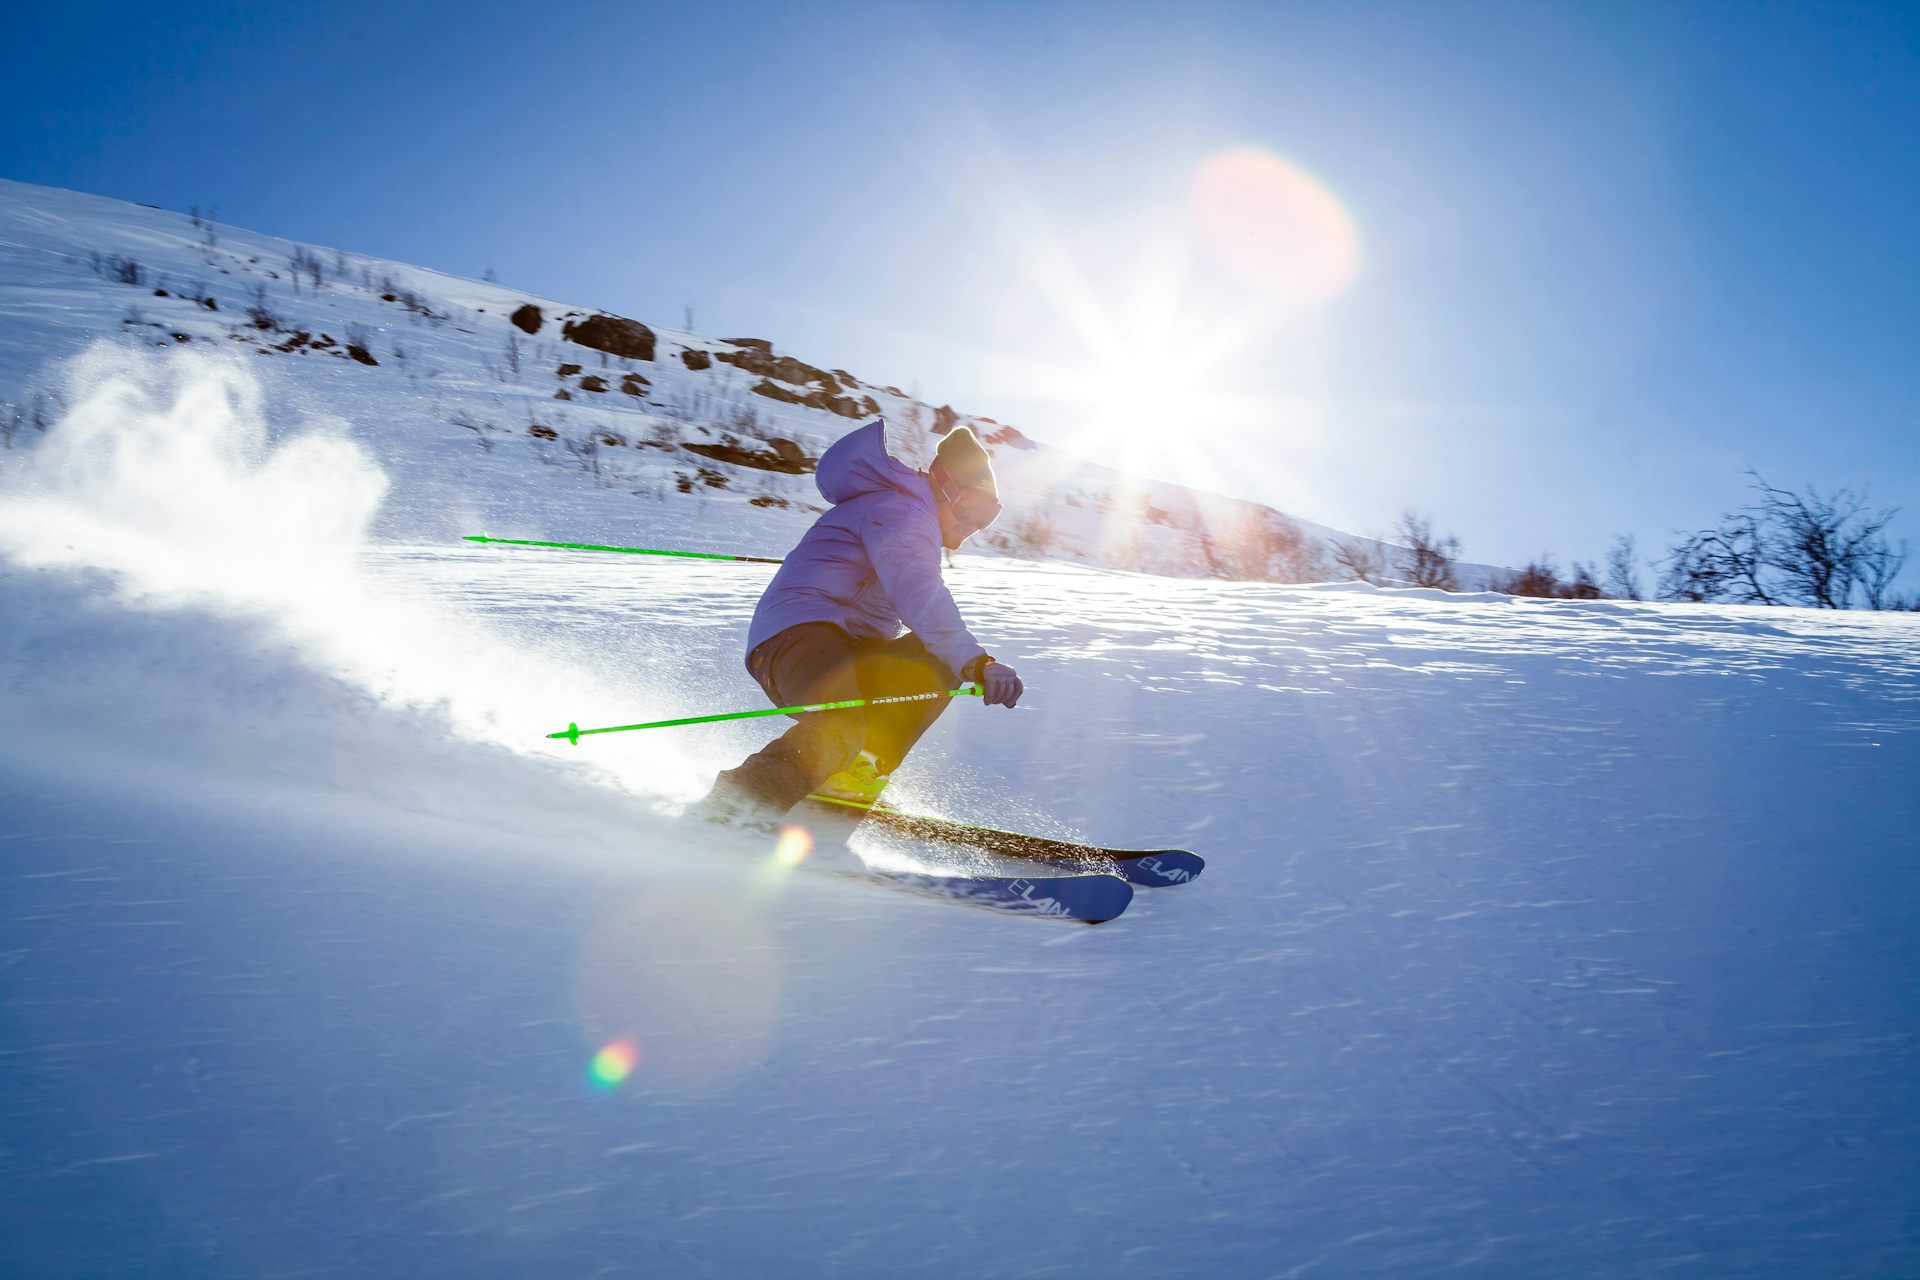 Winter skiing holidays: how to get ski 